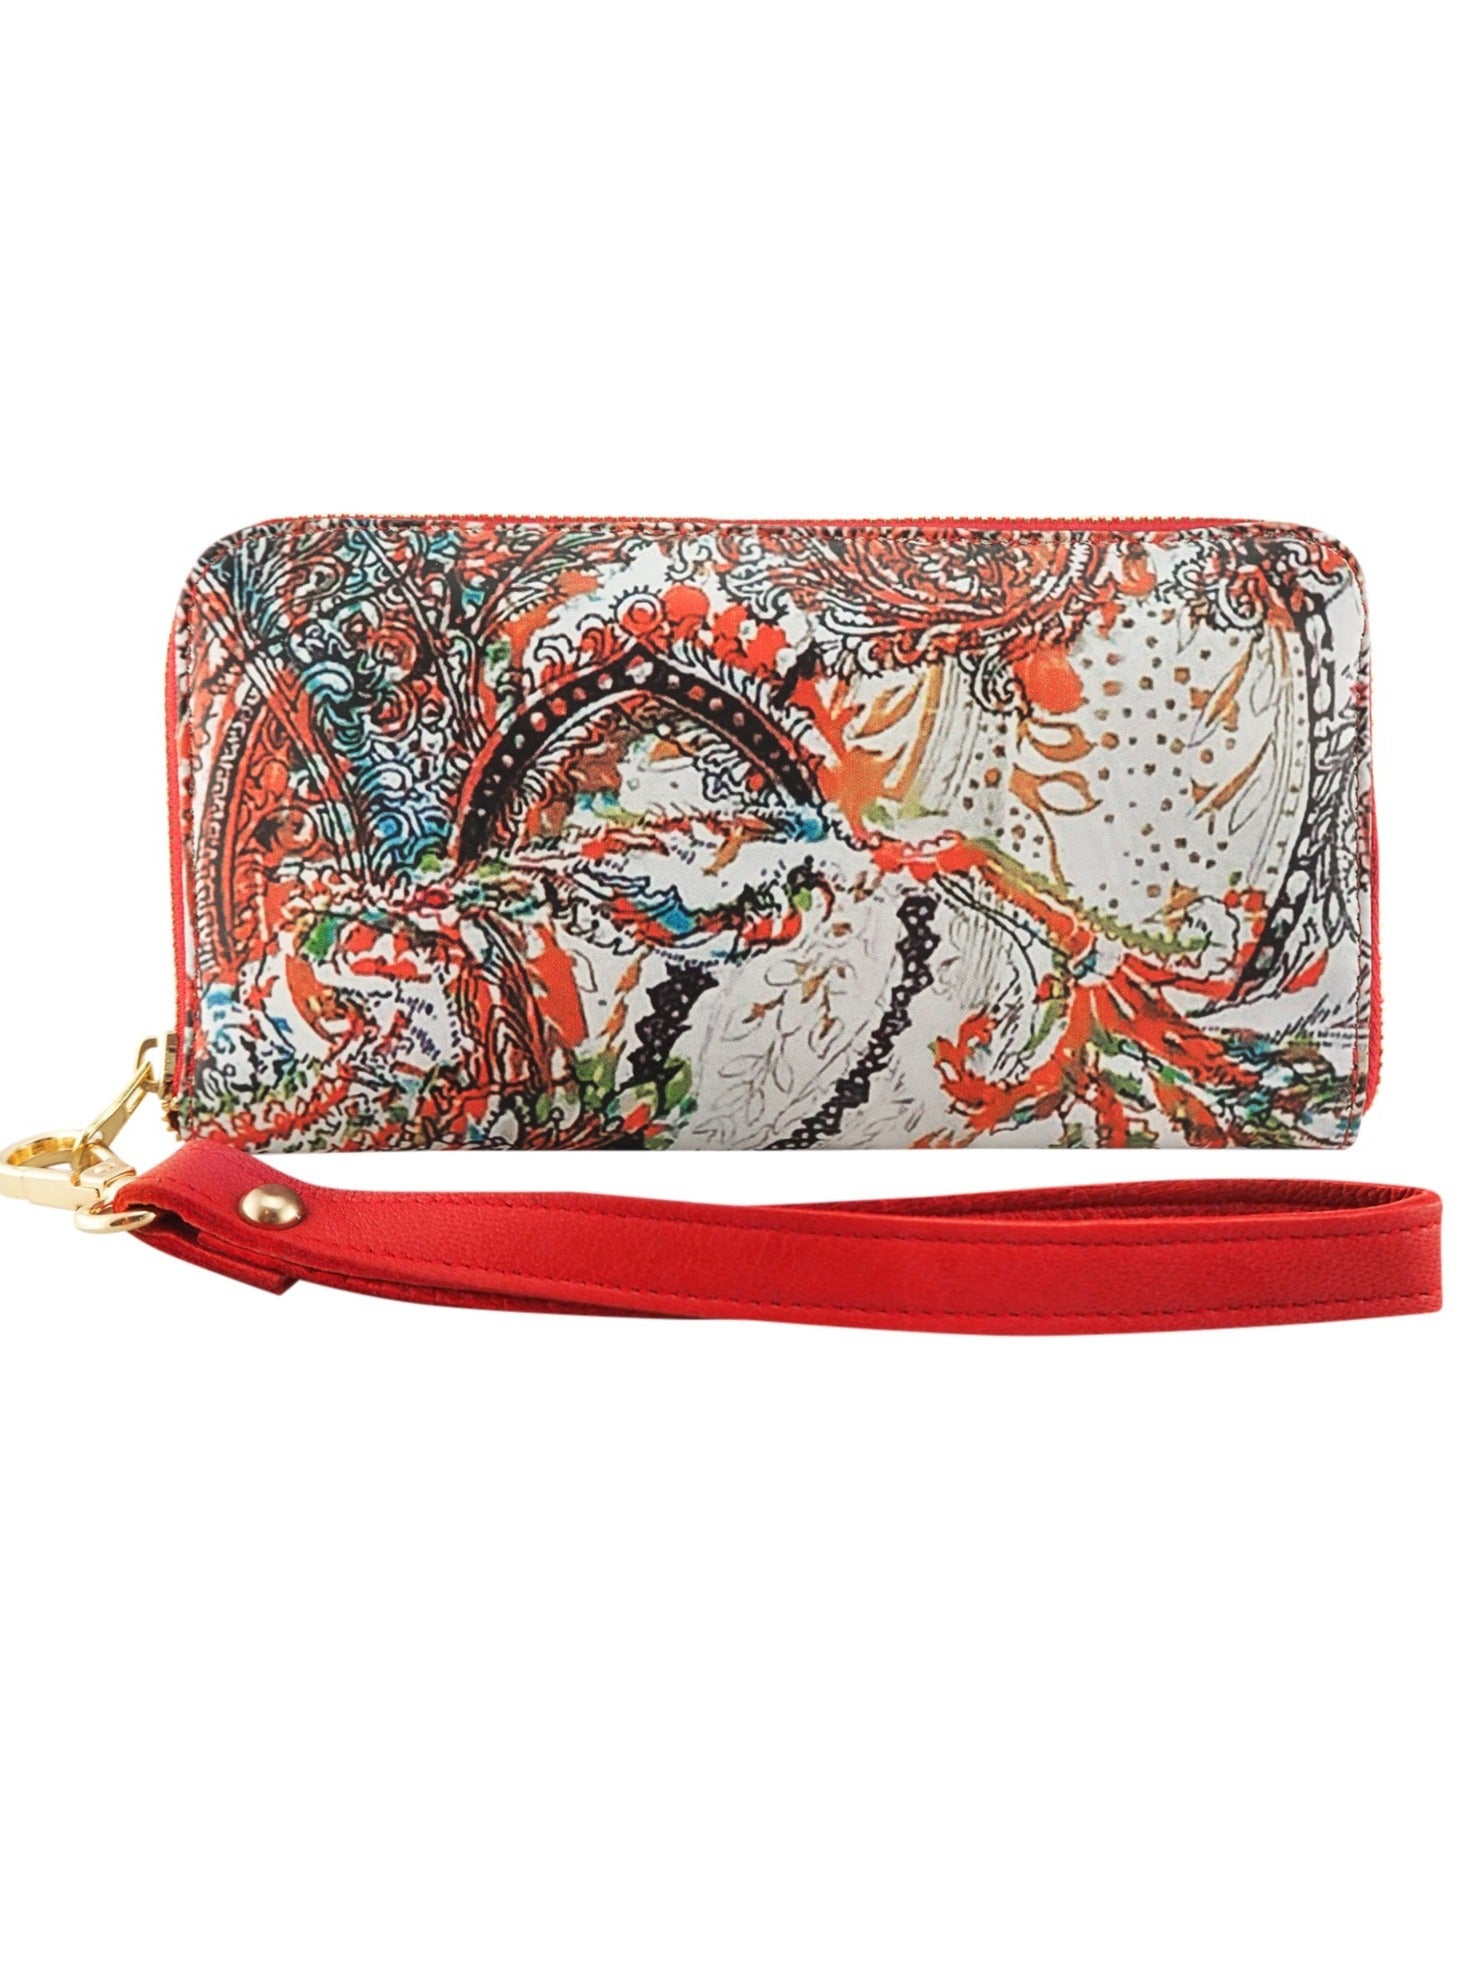 Ruby & Kit Embroidered and Beaded Clutch - 3174304 - Handbags | Strandbags  Australia | Beaded clutch, Purses and bags, Beaded